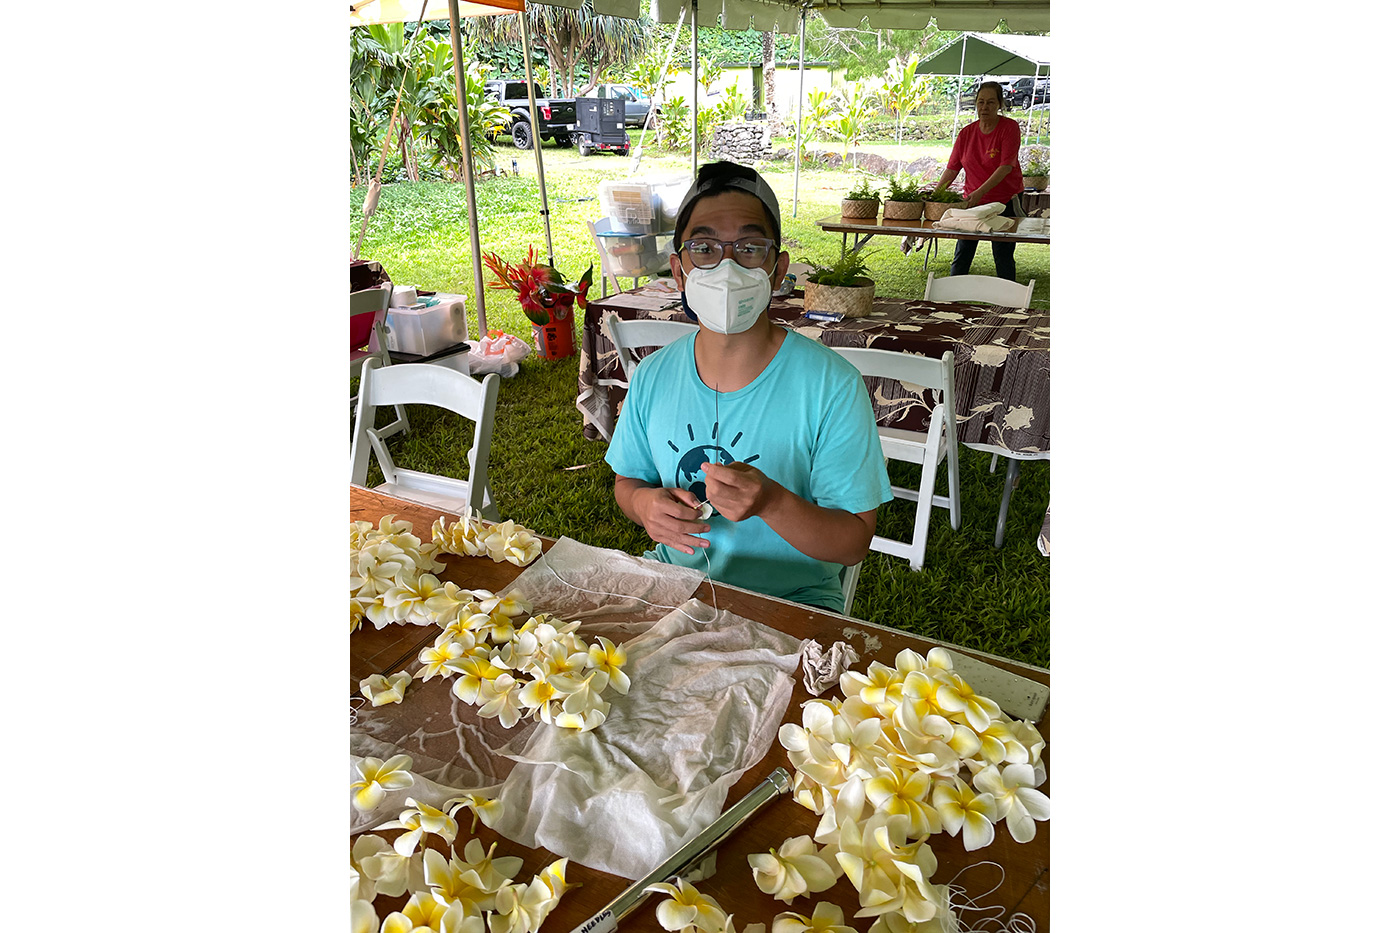 Weon Weian learns lei making in helping to prepare for PAʻI Foundation’s luau for the Smithsonian Institute.